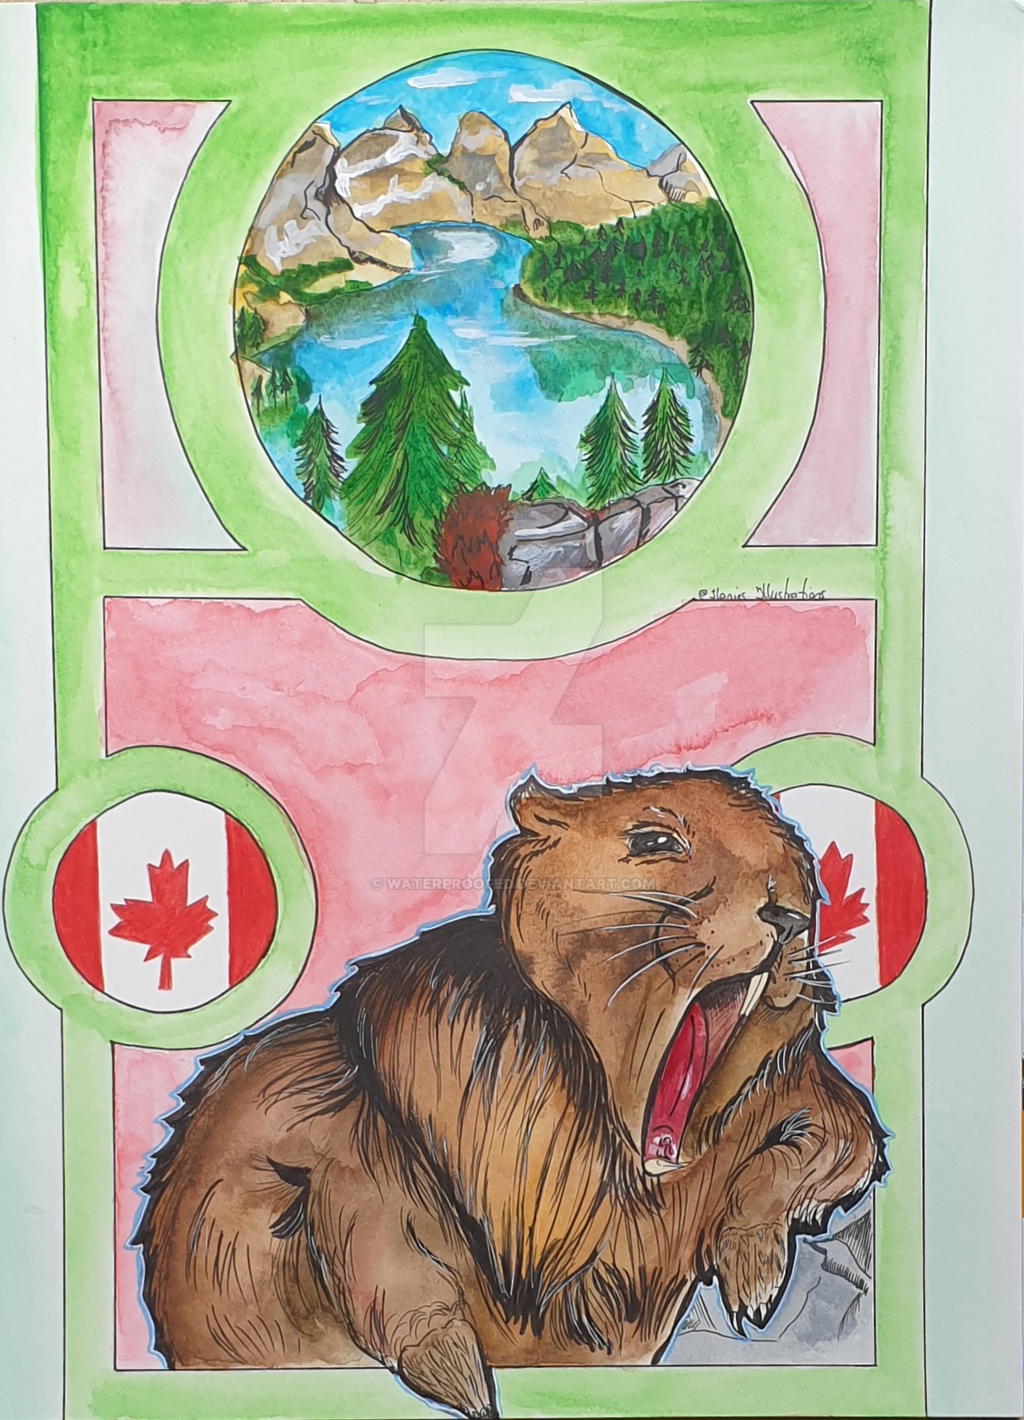 National animal of canada: The beaver by Waterproofed on DeviantArt